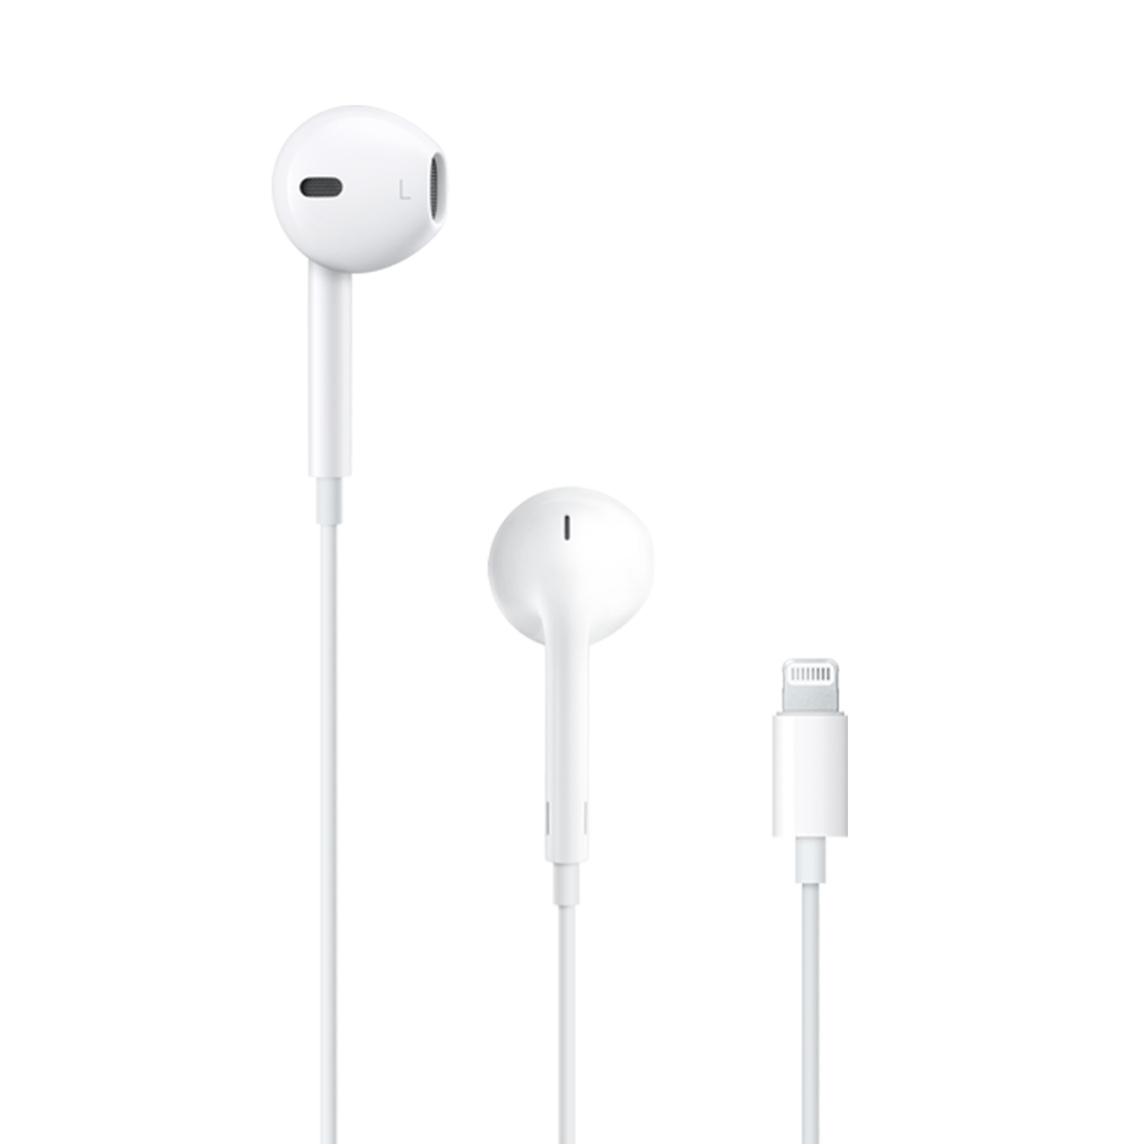 EarPods with Lightning Connectorの側面、背面、およびプラグ。